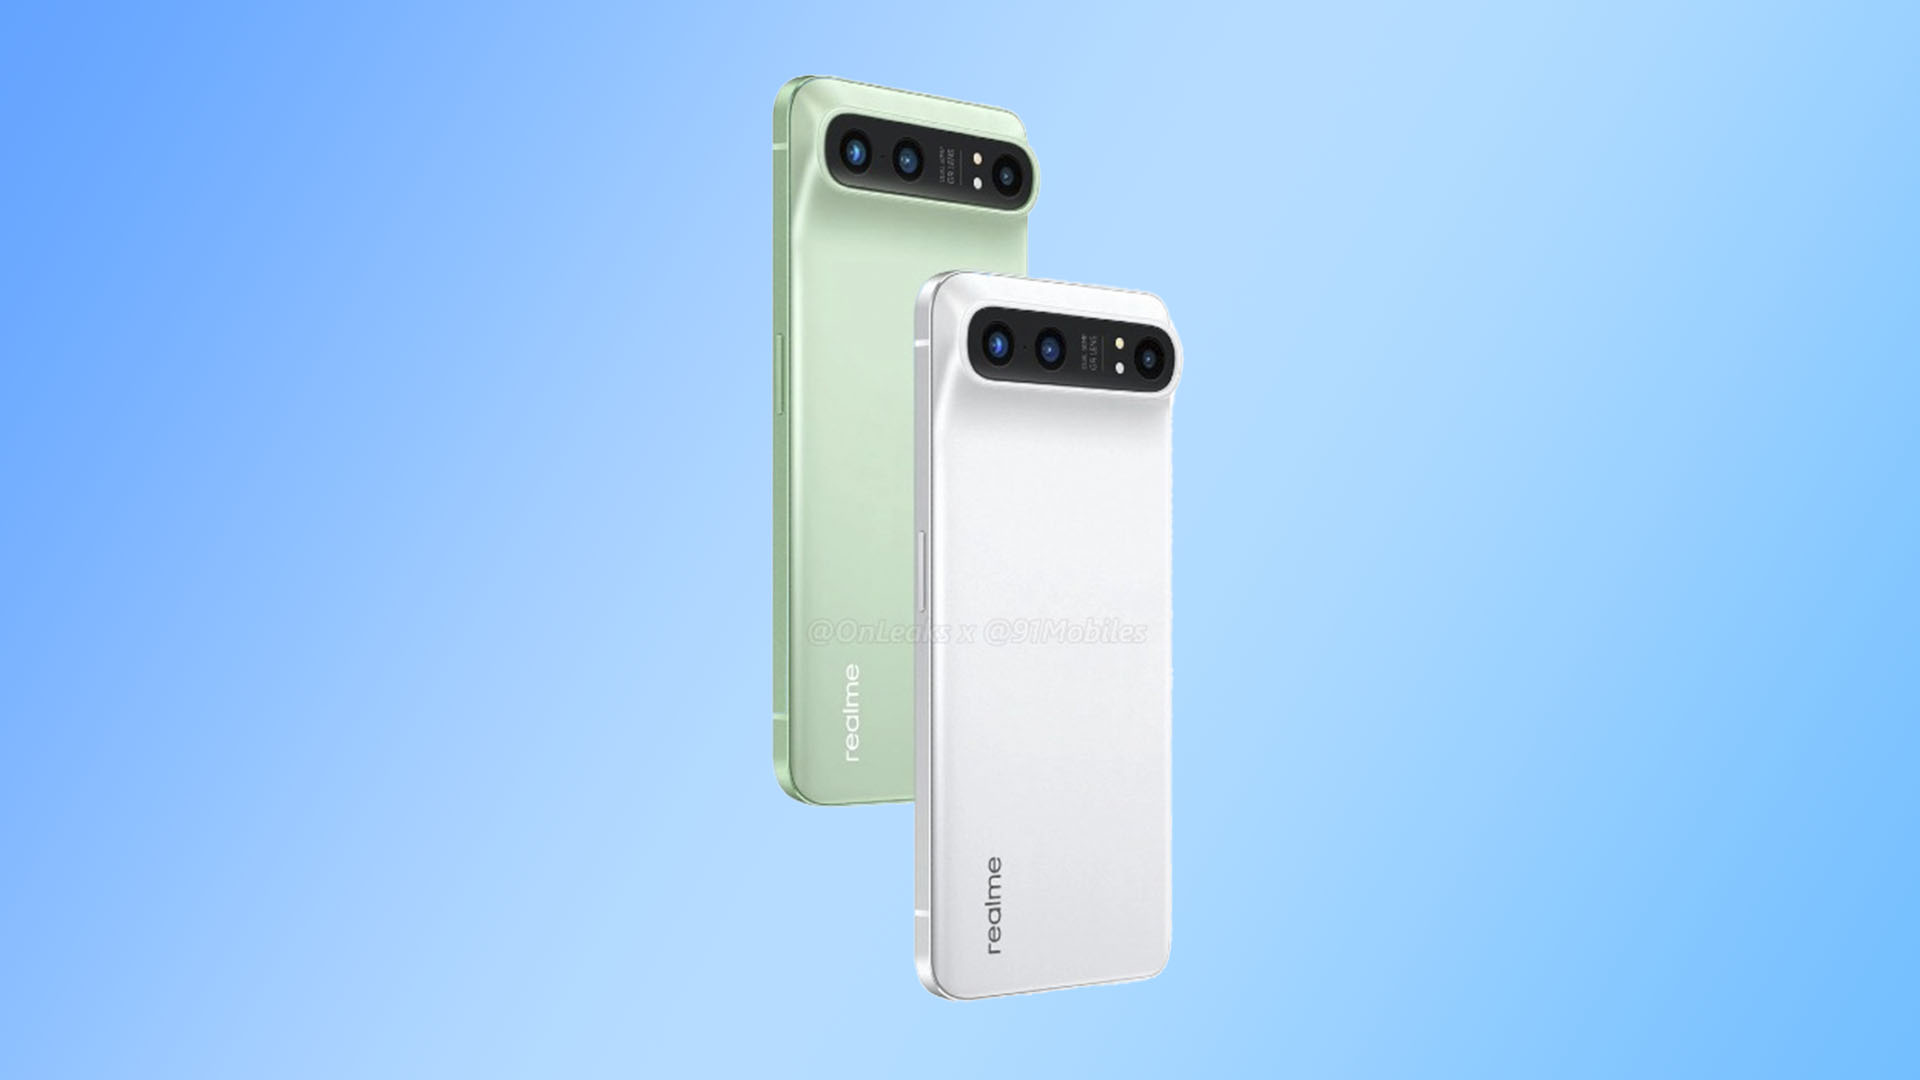 Officially: the flagships Realme GT 2 and Realme GT 2 Pro will present on January 4